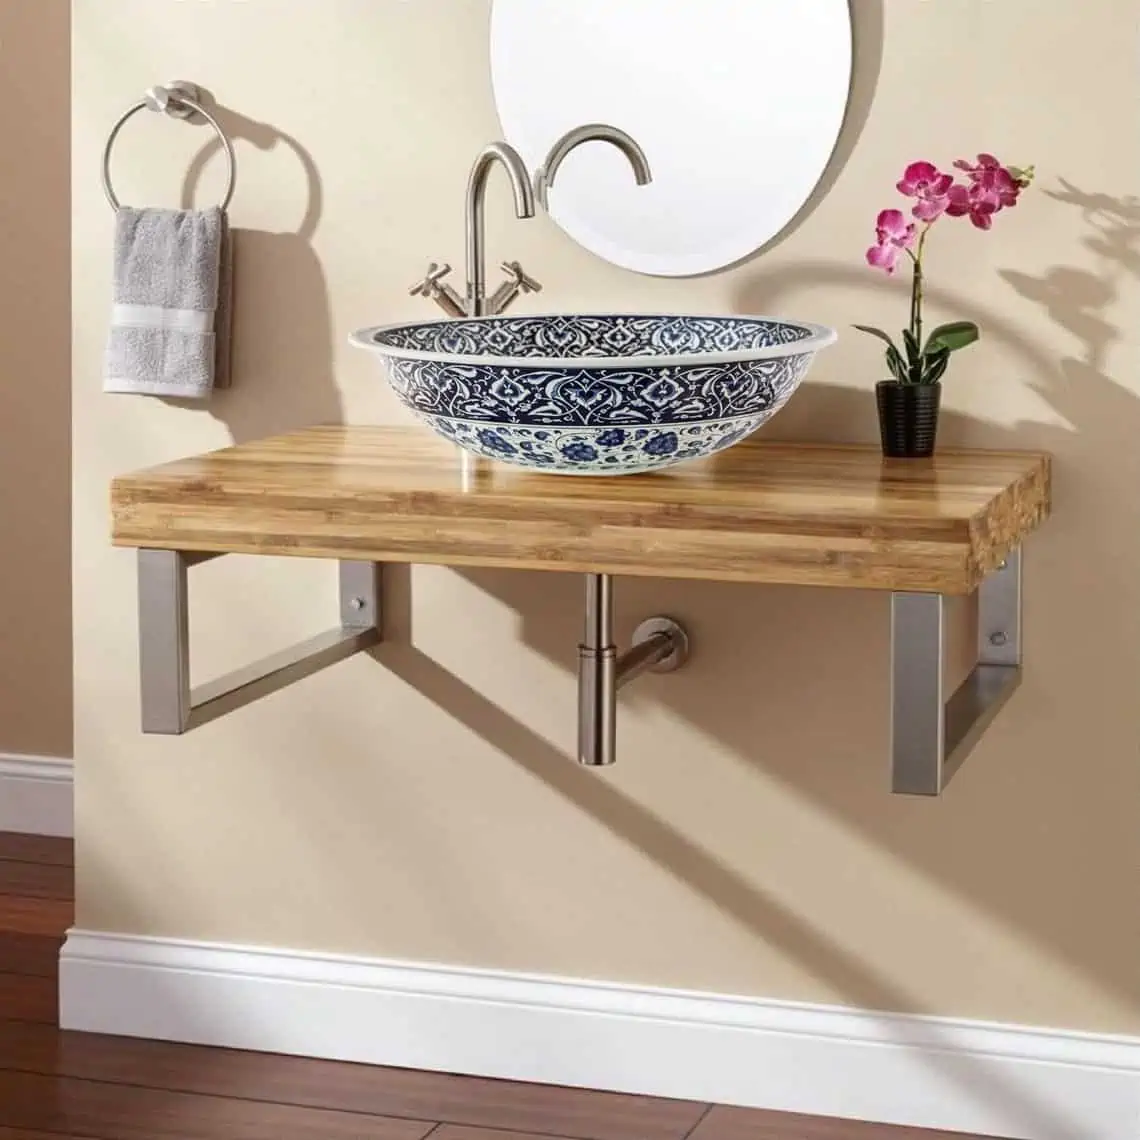 washbasin with a mirror, tap, towel, plant on a brown wooden counter